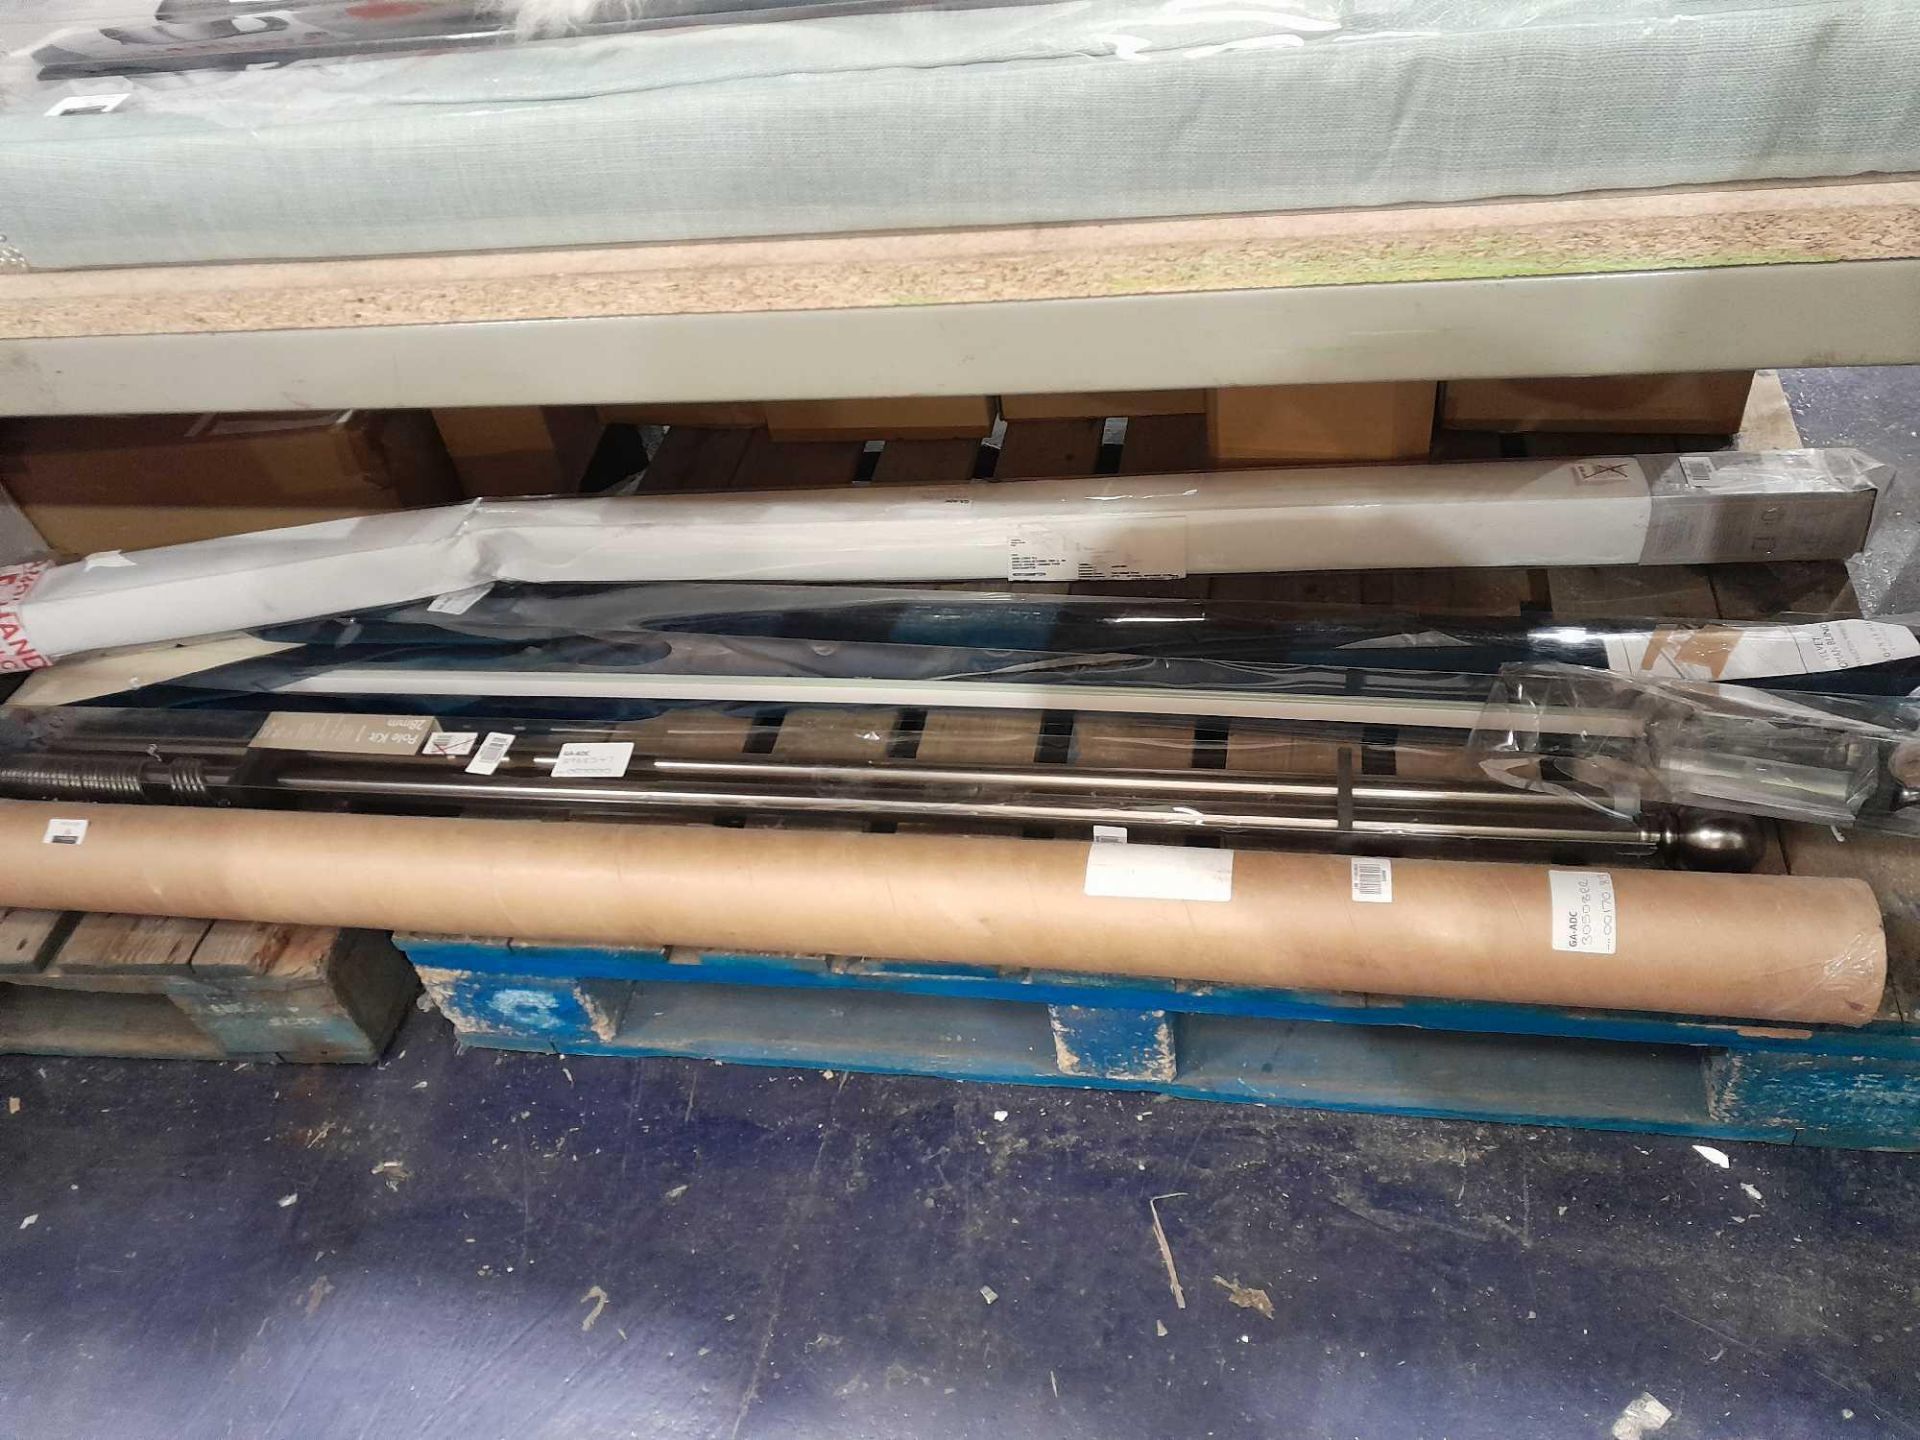 Rrp £250 Lot To Contain 4 Boxed Assorted John Lewis Curtain Pole Kits And Roller Blinds Sets - Image 2 of 2